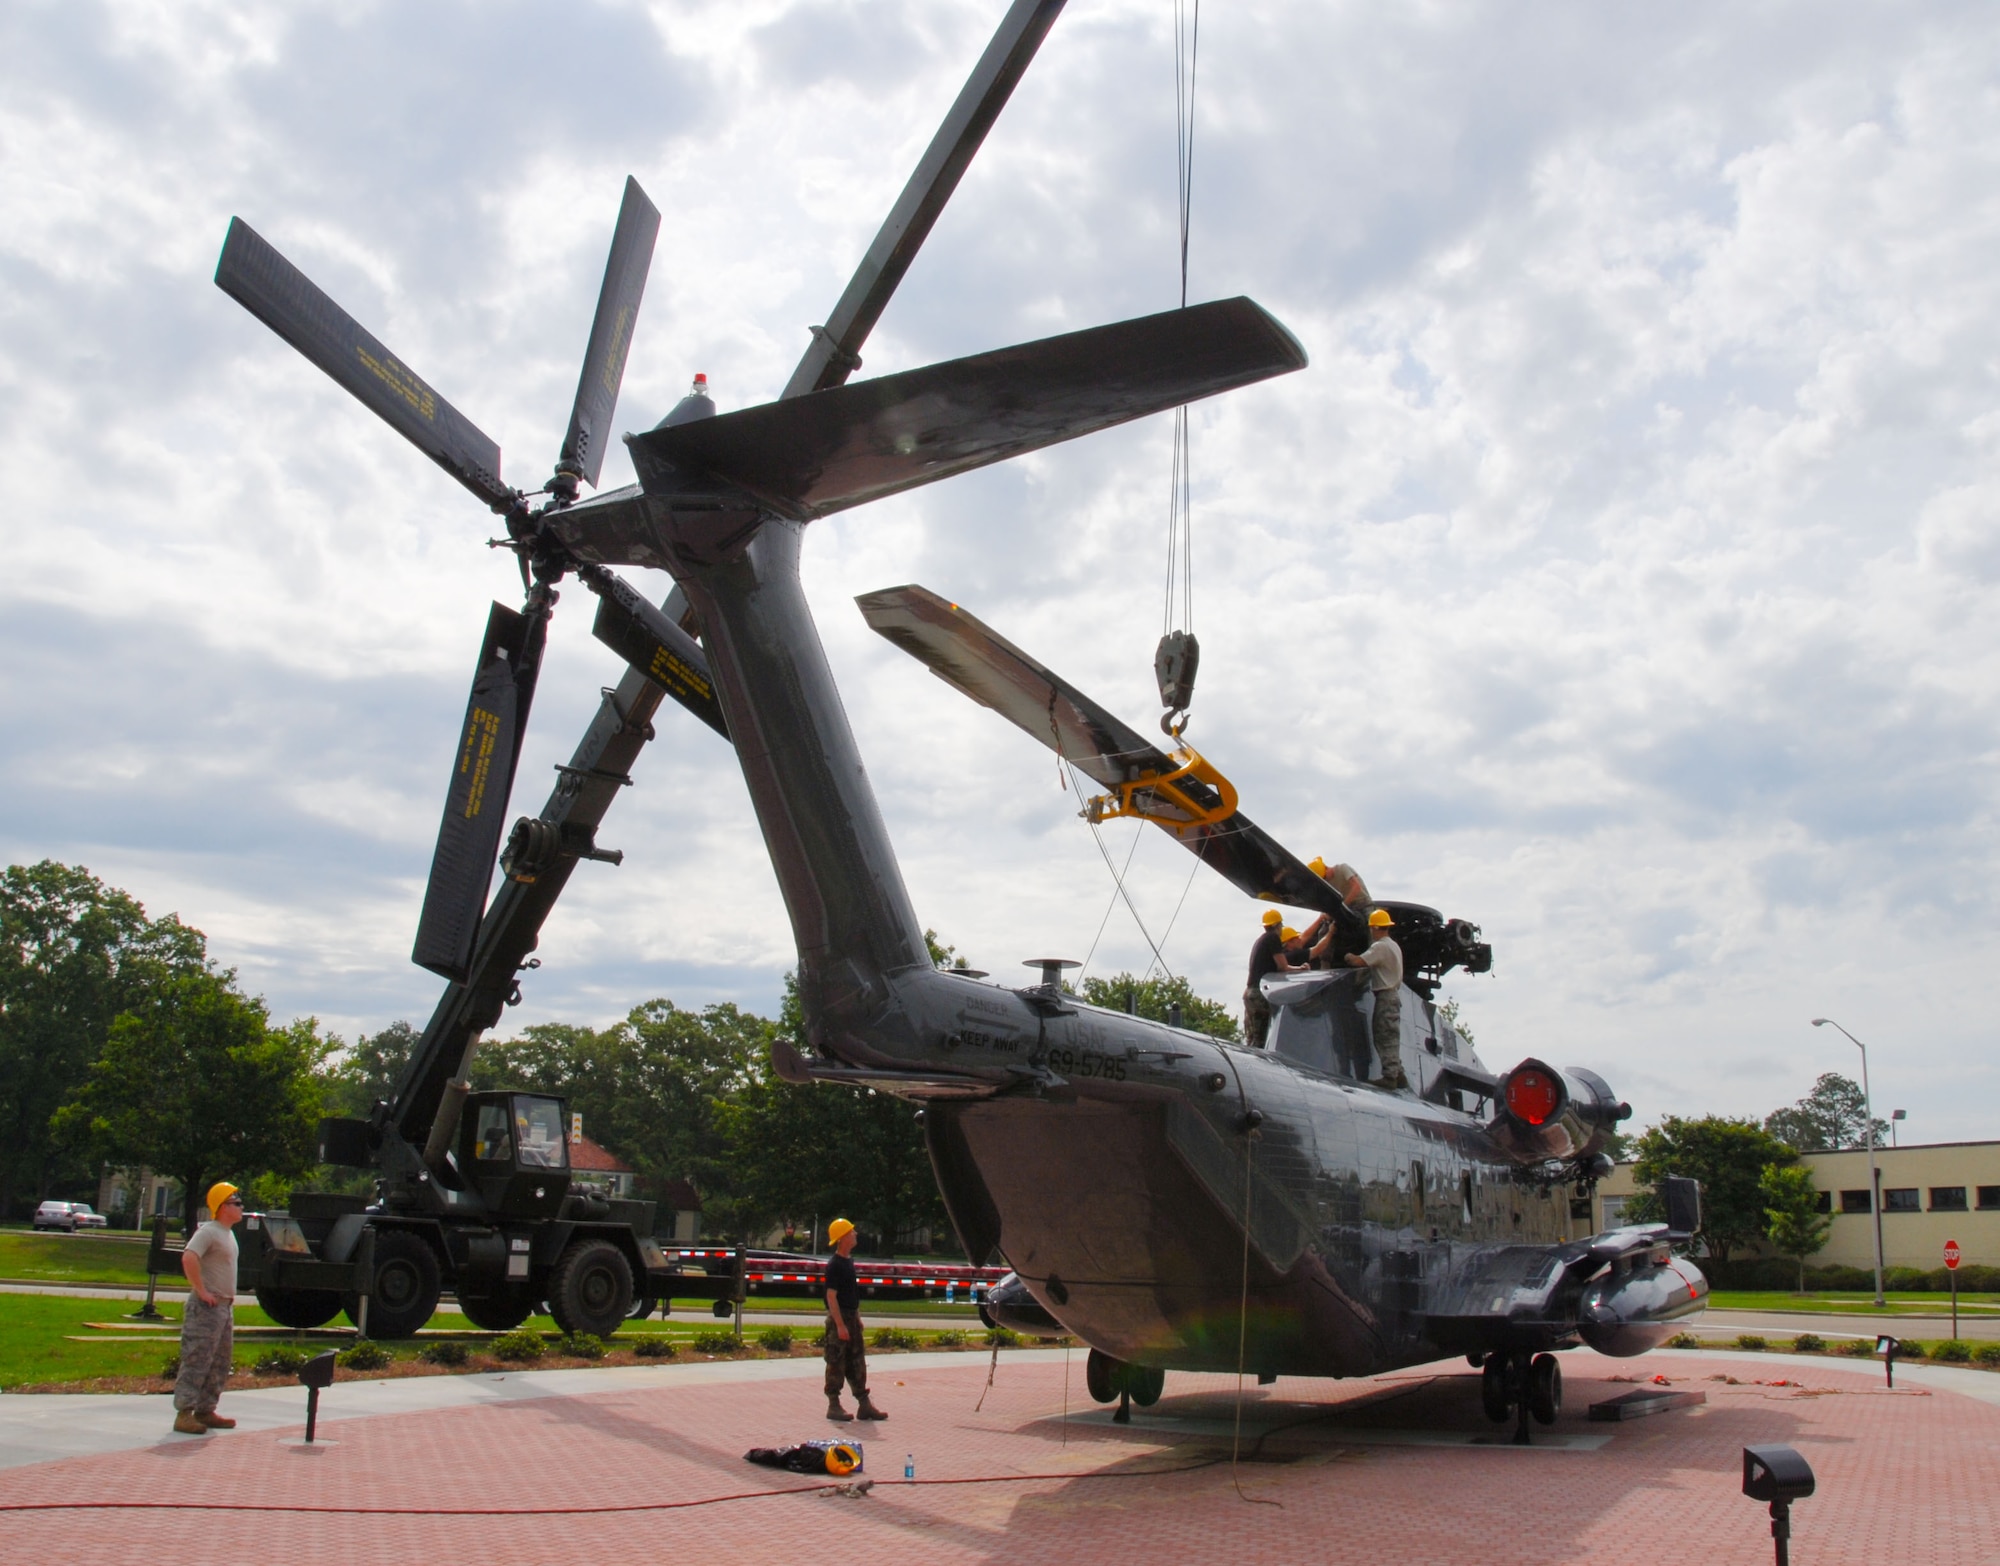 Workers mount the rotors on a new addition to Maxwell’s Air Park. The MH-53 Pave Low helicopter is scheduled to be dedicated June 8 at the park. The aircraft comes to Maxwell from the 20th Special Operations Squadron with its last mission served in Iraq. The aircraft was involved in the May, 1975 assault on Koh Tang Island following seizure of the U.S.S. Mayaguez and its crew by Cambodian Khmet Rouge forces, and was the last helicopter to leave Cambodia as it carried out the last load of Marine guards from the American embassy in Phnom Phen in Operation Eagle Pull. It is also thought to have conducted the first operational Pave Low mission of "low-level, long-range and undetected penetration into denied areas" when it rescued a priest who crashed his light aircraft on a snow-covered mesa breaking his ankle. The park was originally proposed in February, 1982 by then Air University Commander Lt. Gen. Charles Cleveland. (U.S. Air Force photo/Jamie Pitcher)